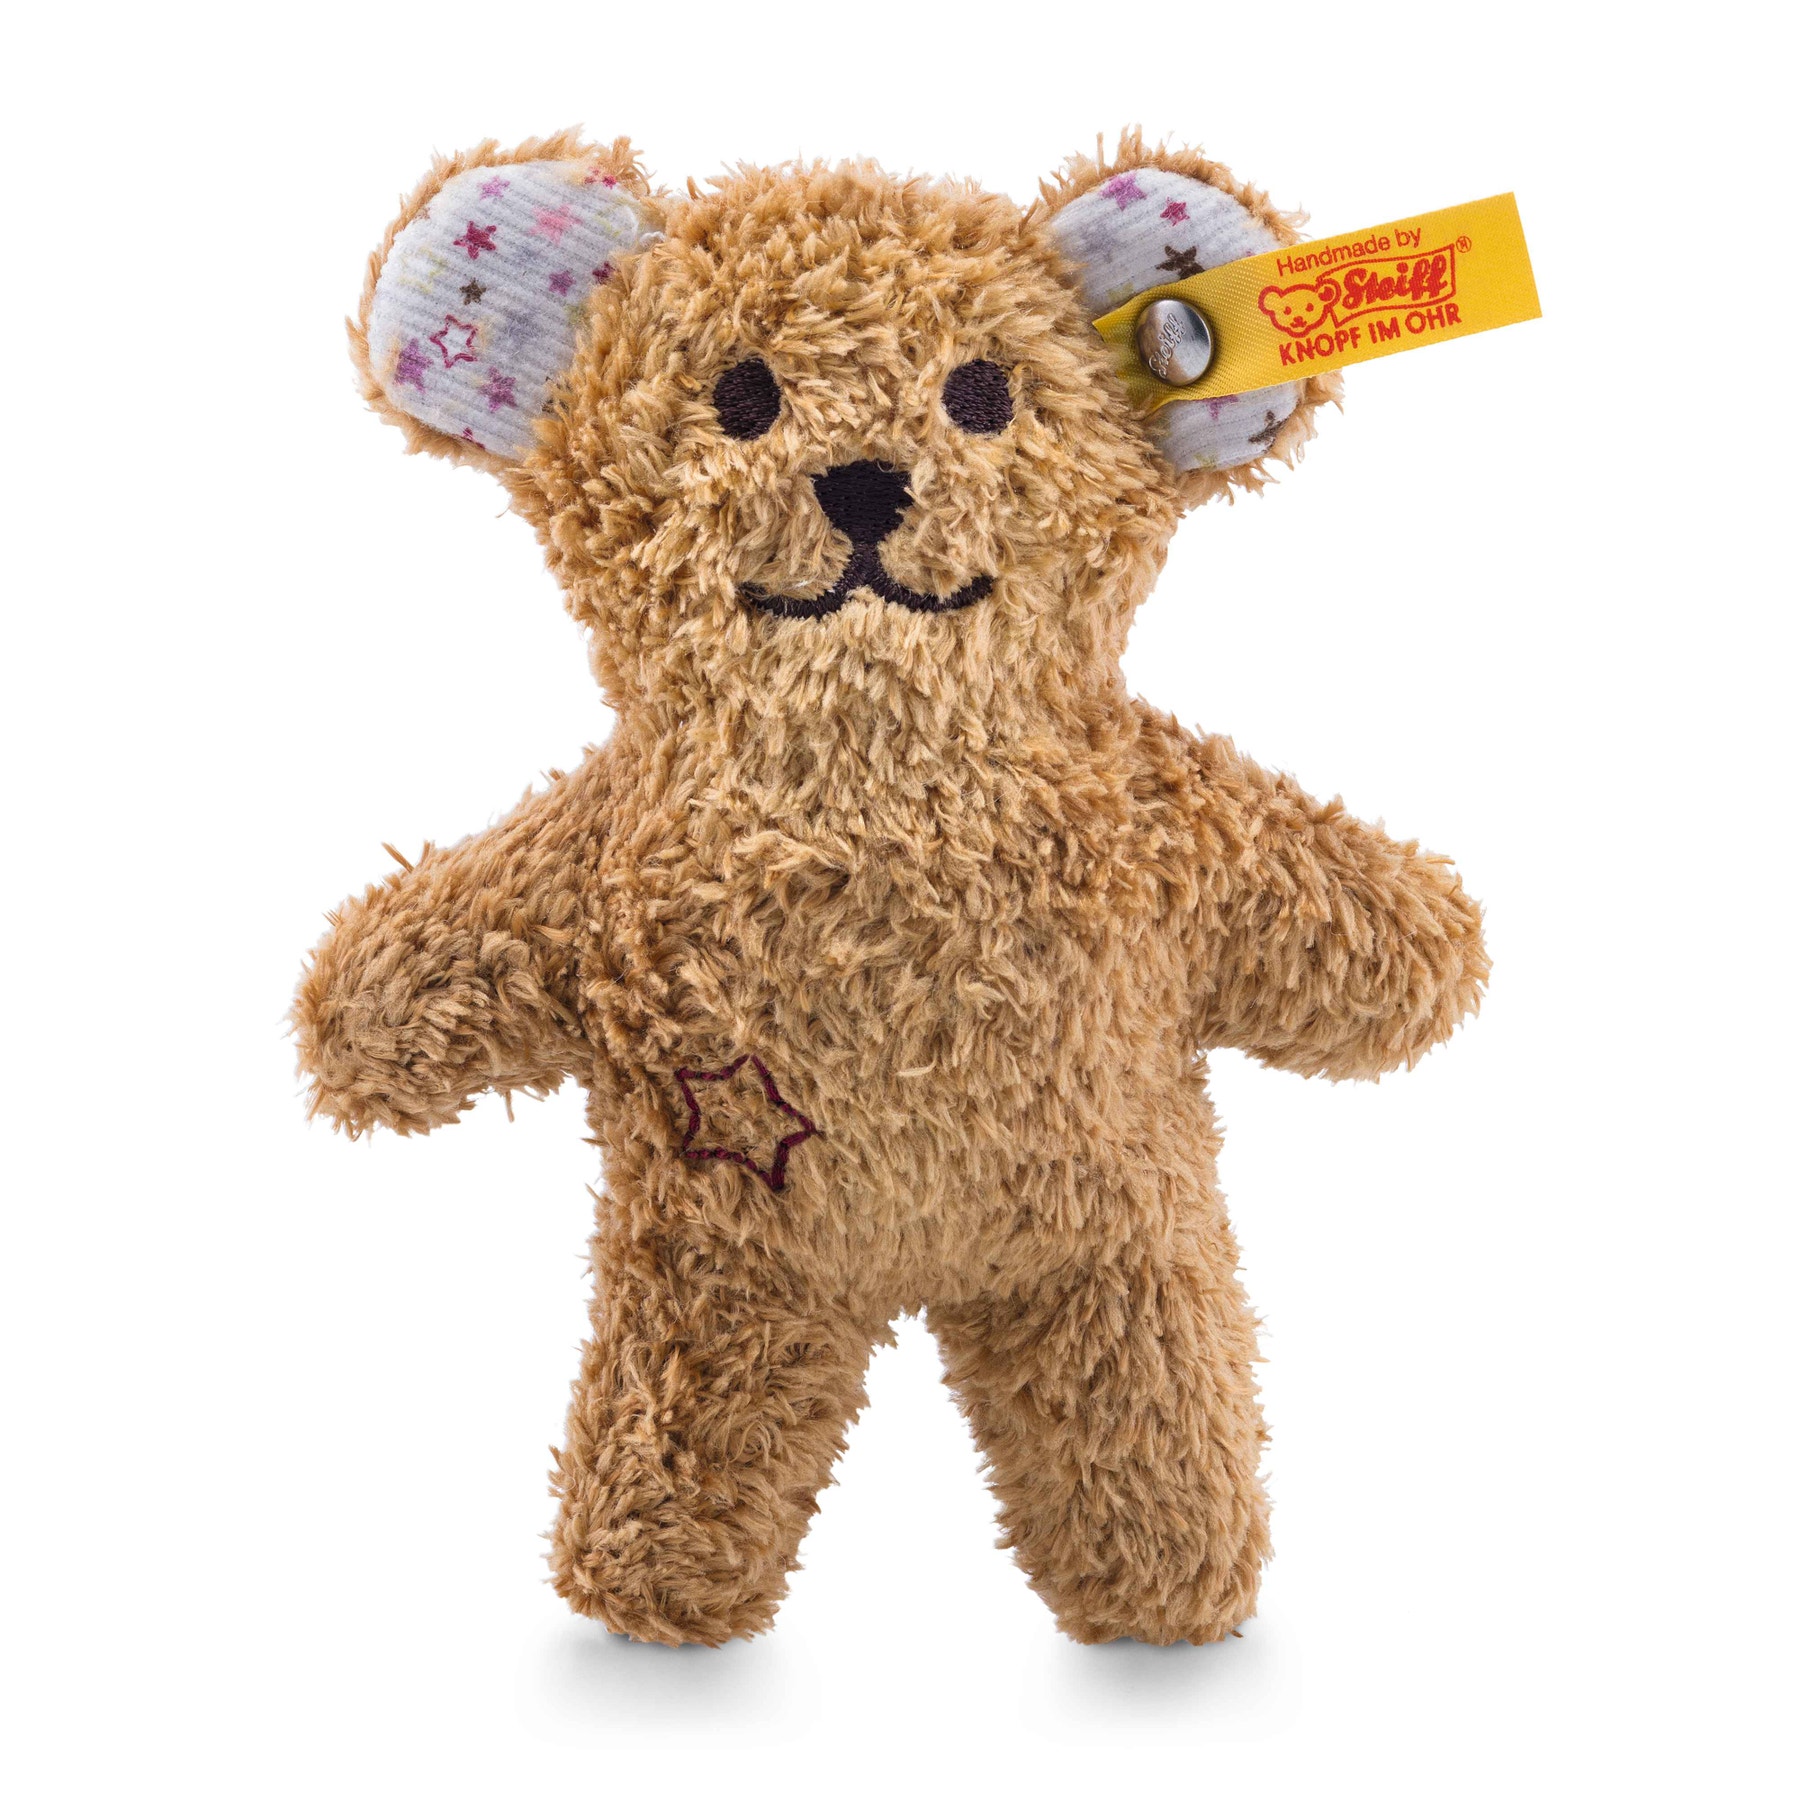 Mini Teddy bear with rustling foil and rattle